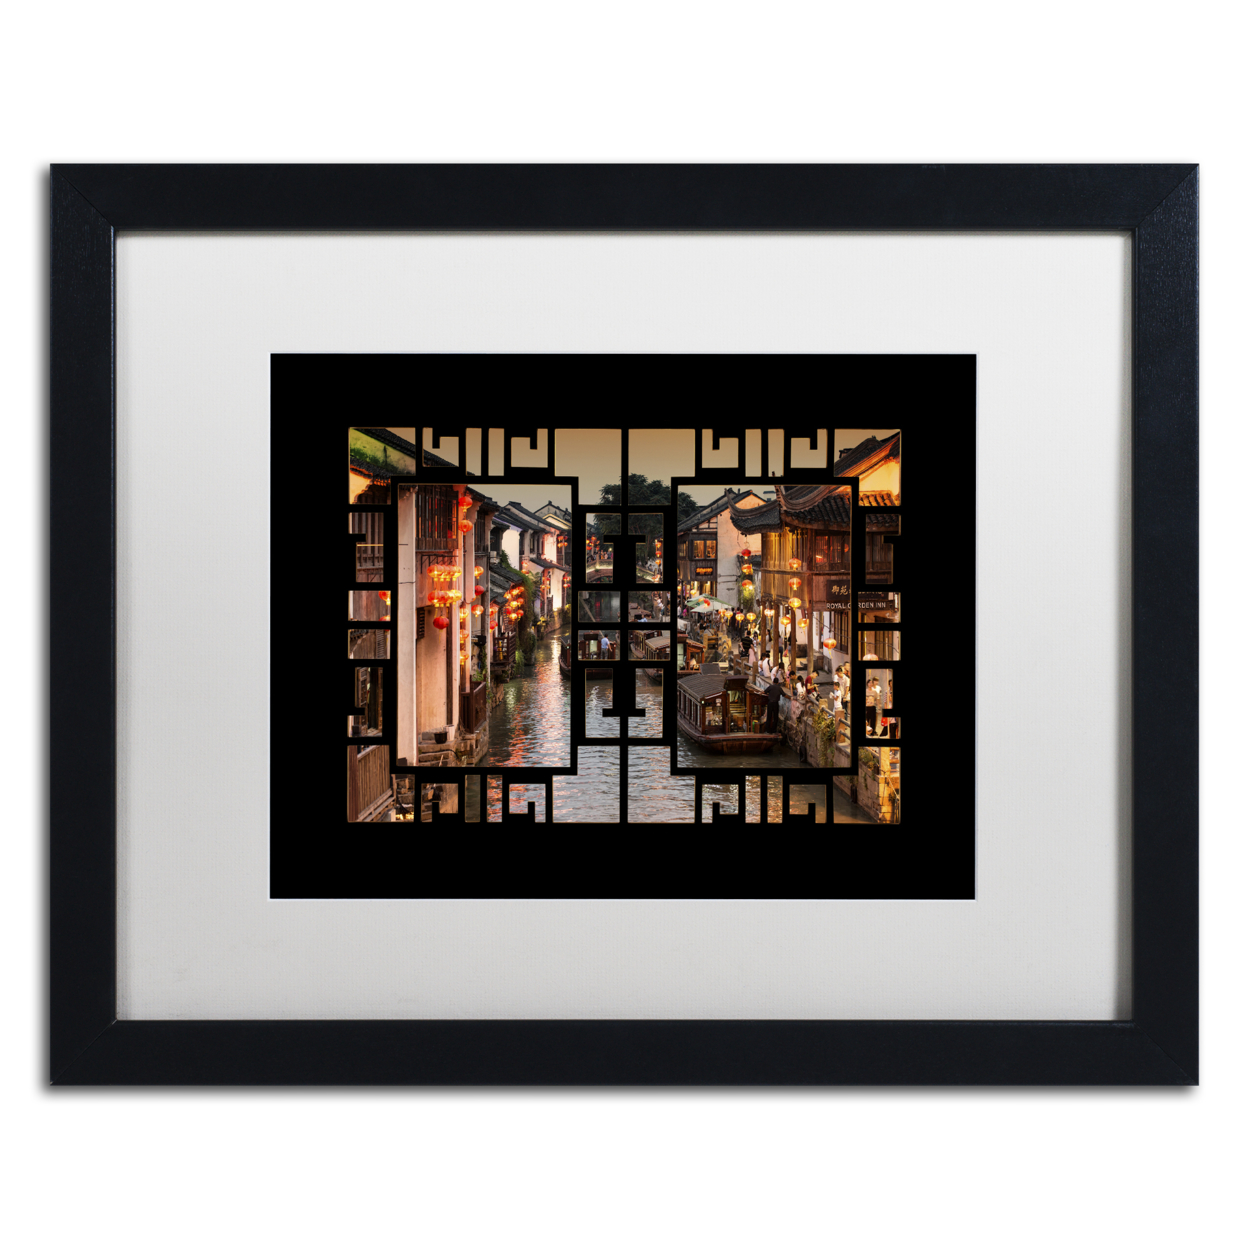 Philippe Hugonnard 'Water City' Black Wooden Framed Art 18 X 22 Inches